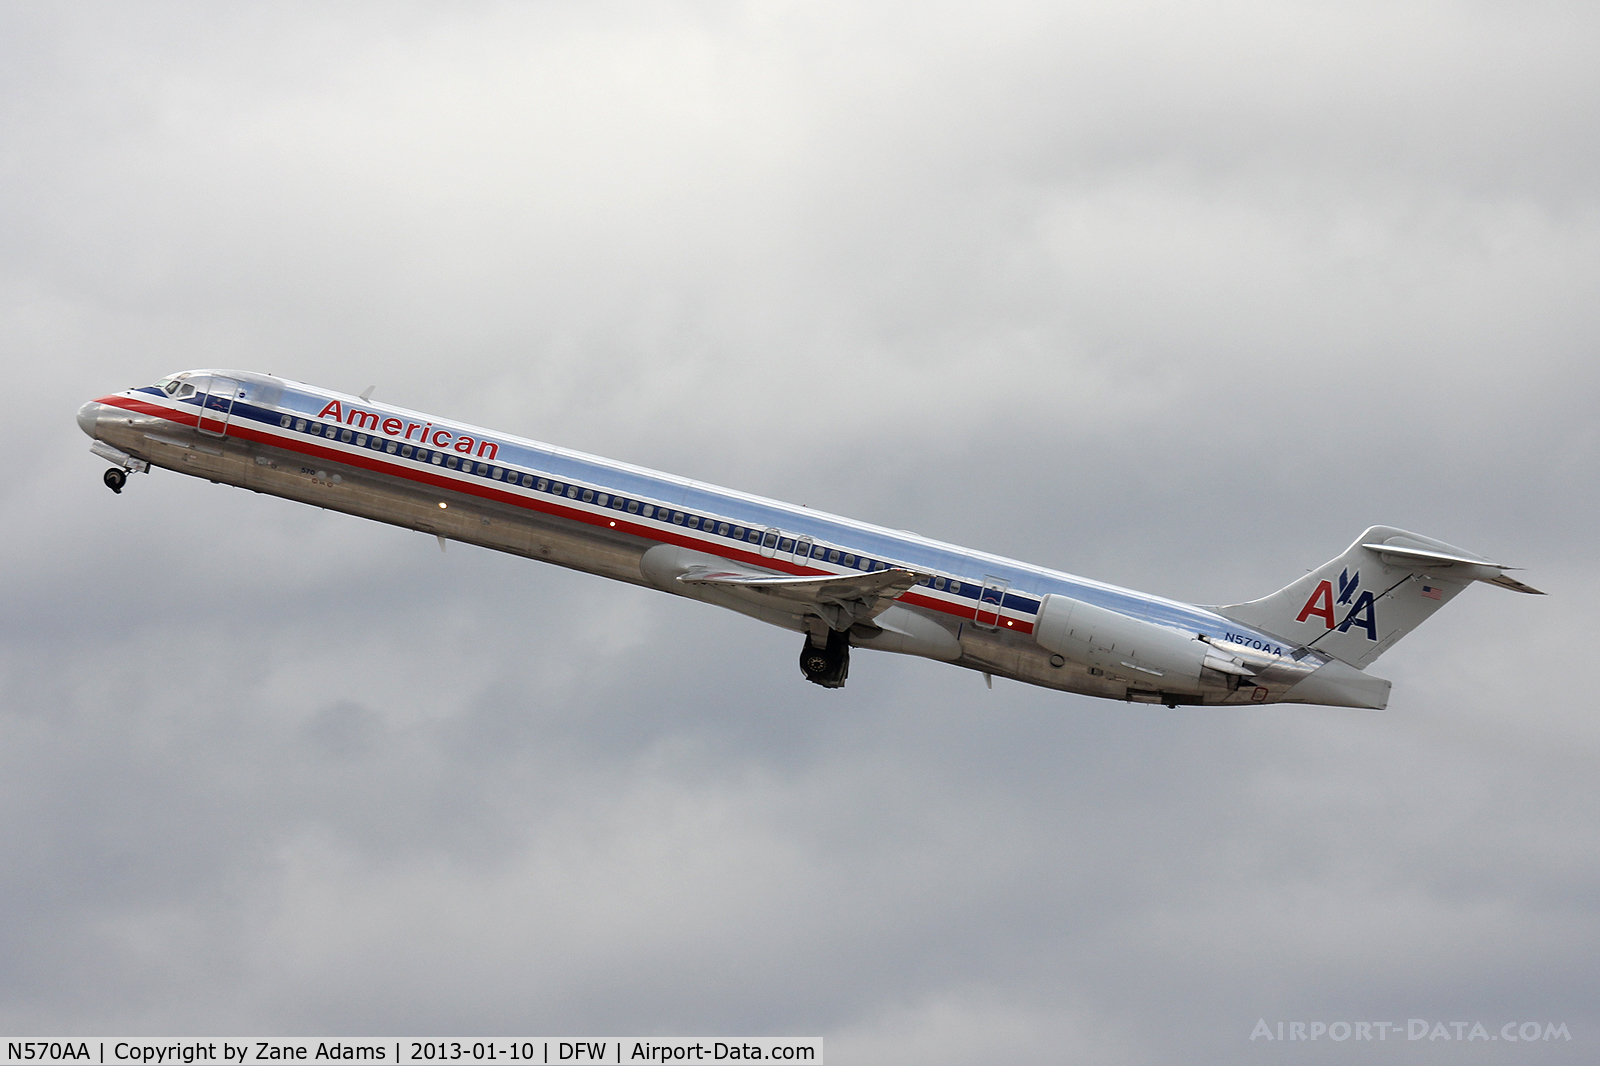 N570AA, 1987 McDonnell Douglas MD-83 (DC-9-83) C/N 49352, American Airlines at DFW Airport